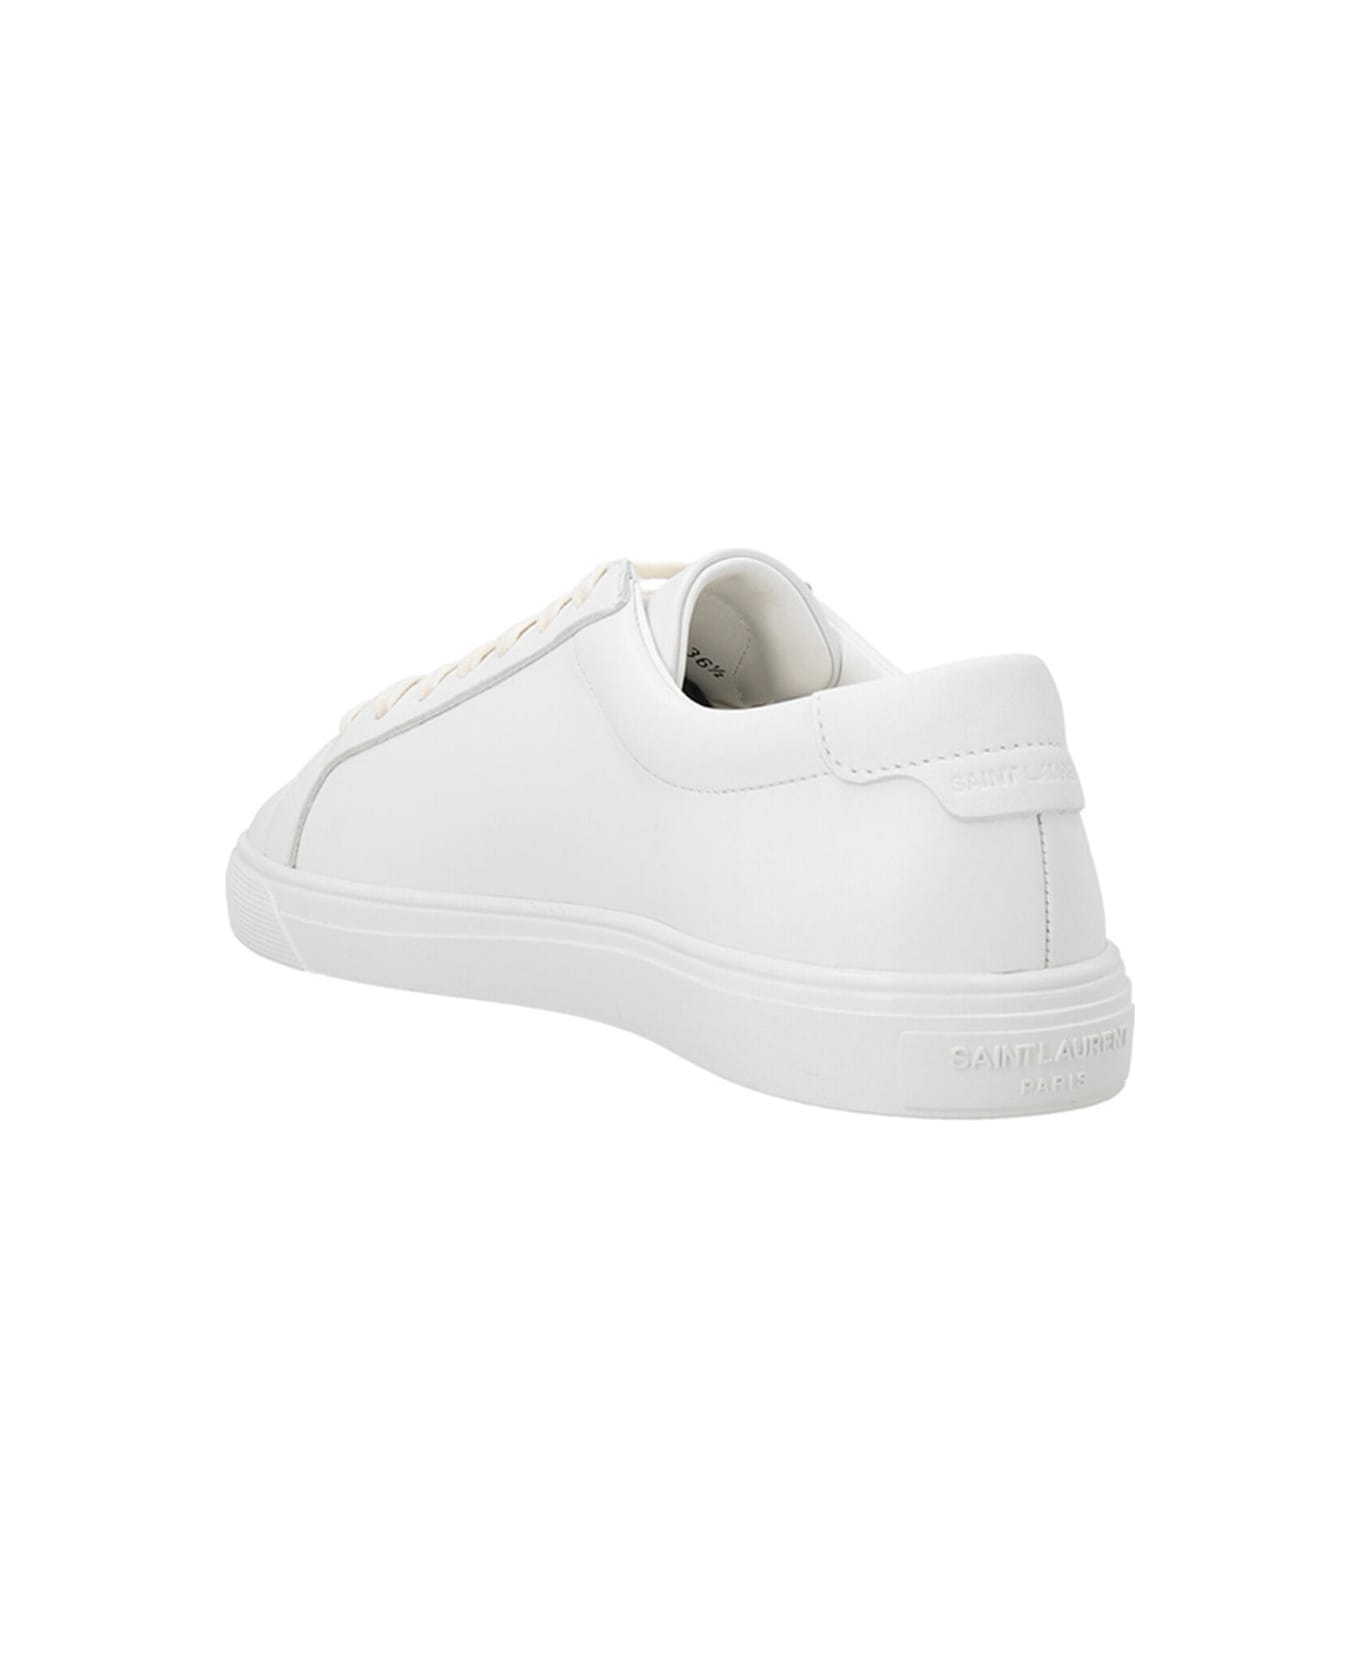 Saint Laurent Andy Leather Sneakers - White